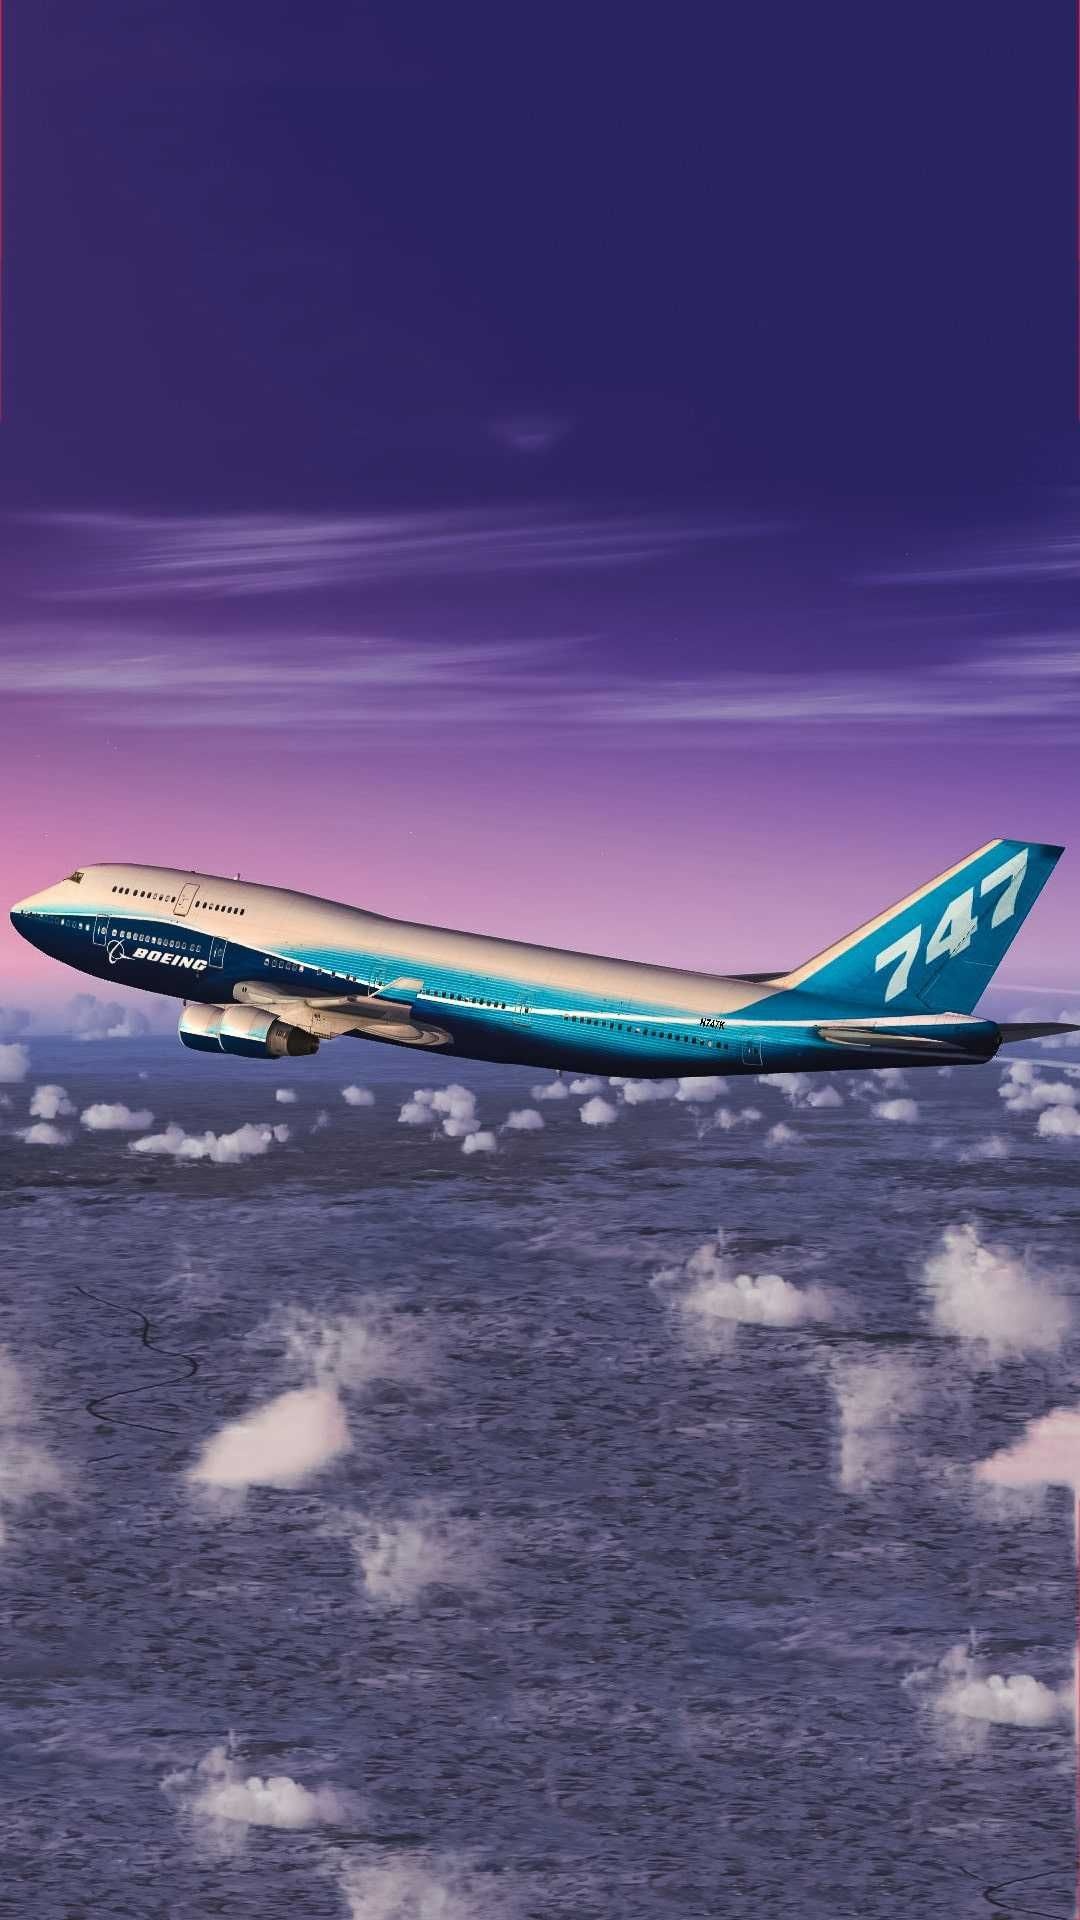 Boeing 747 wallpapers, Explore Aero world, Wallpaper collection, Unique aviation art, 1080x1920 Full HD Phone